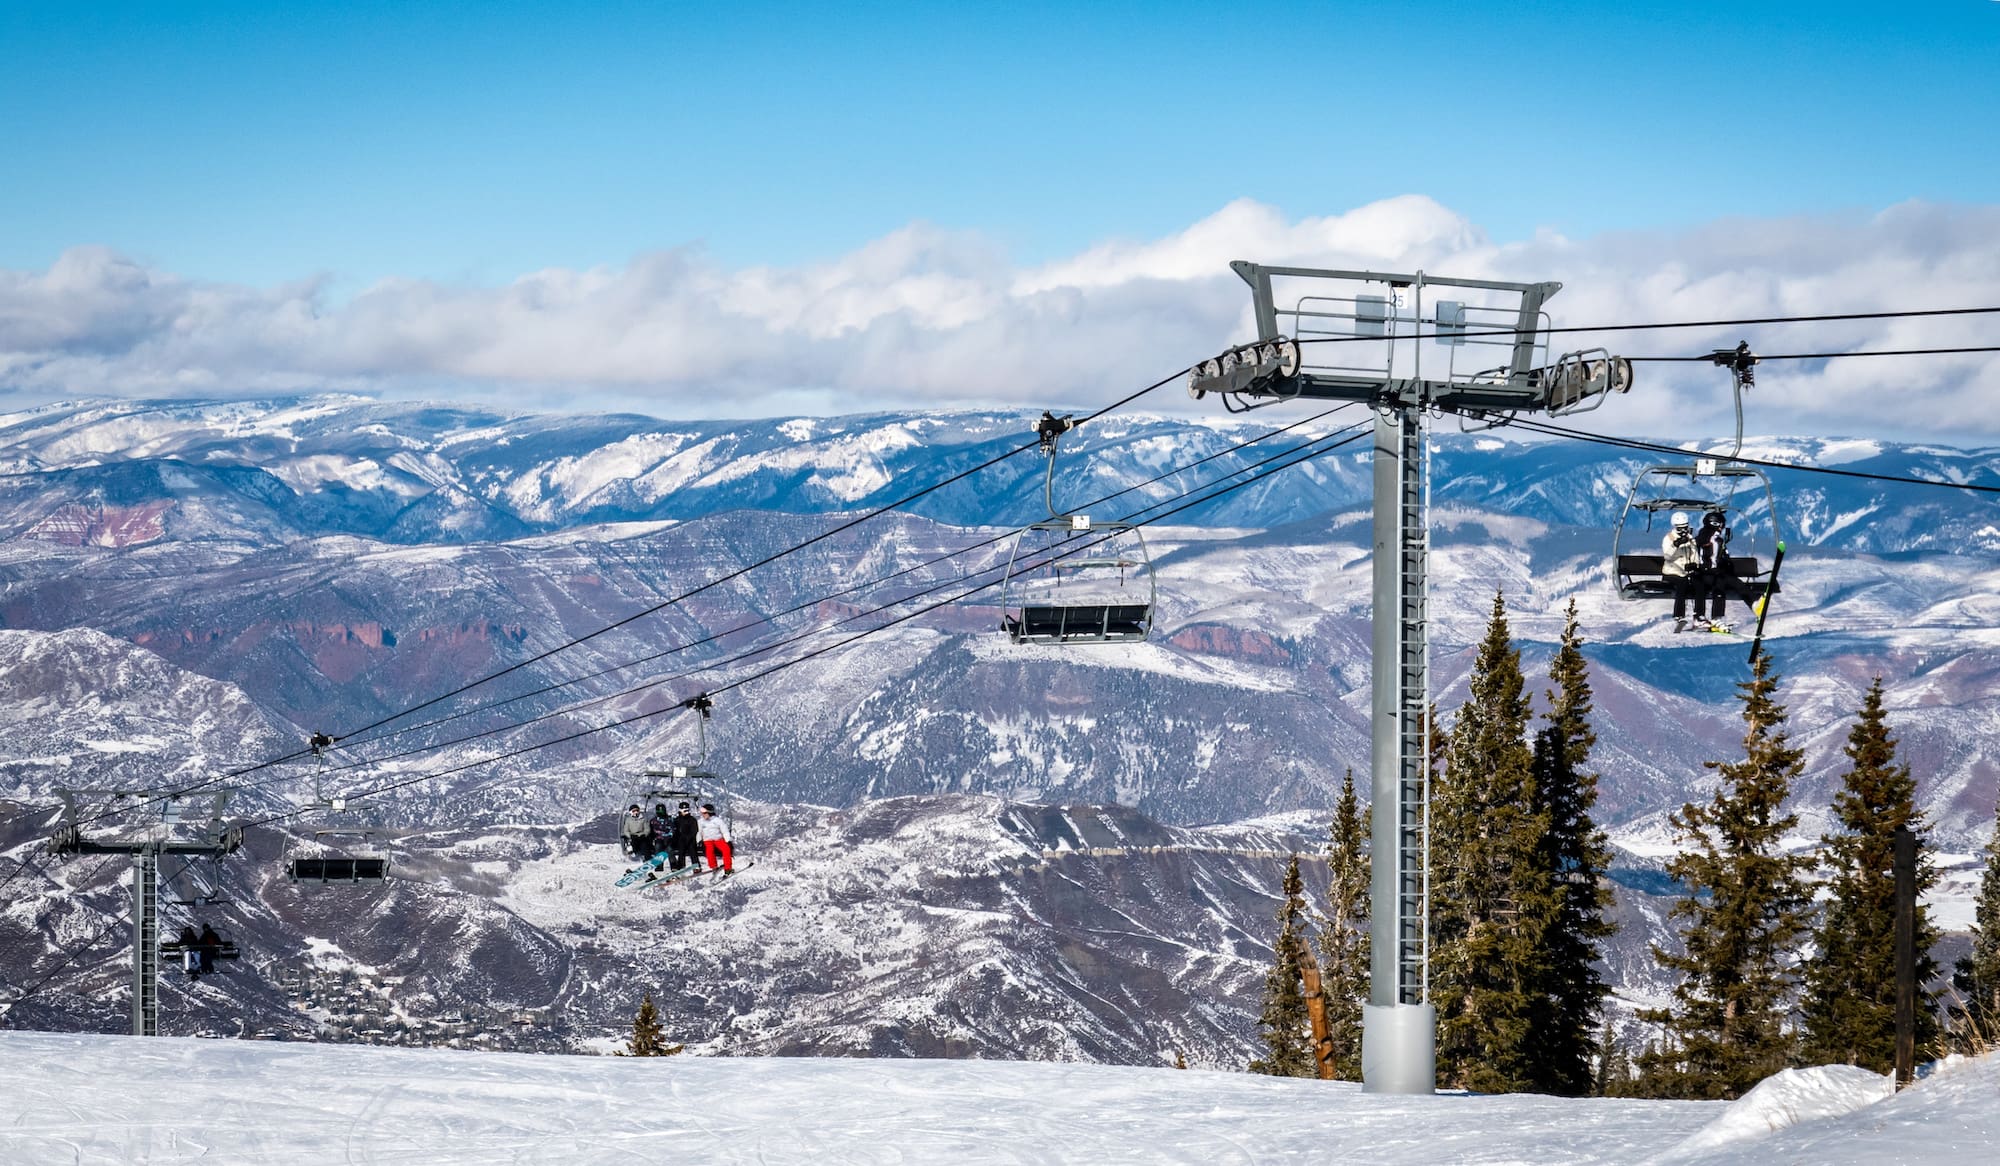 Skiers and snowboarders ascend the Elk Camp chairlift at the Aspen Snowmass ski resort, in the Rocky Mountains of Colorado on a partly cloudy winter day.